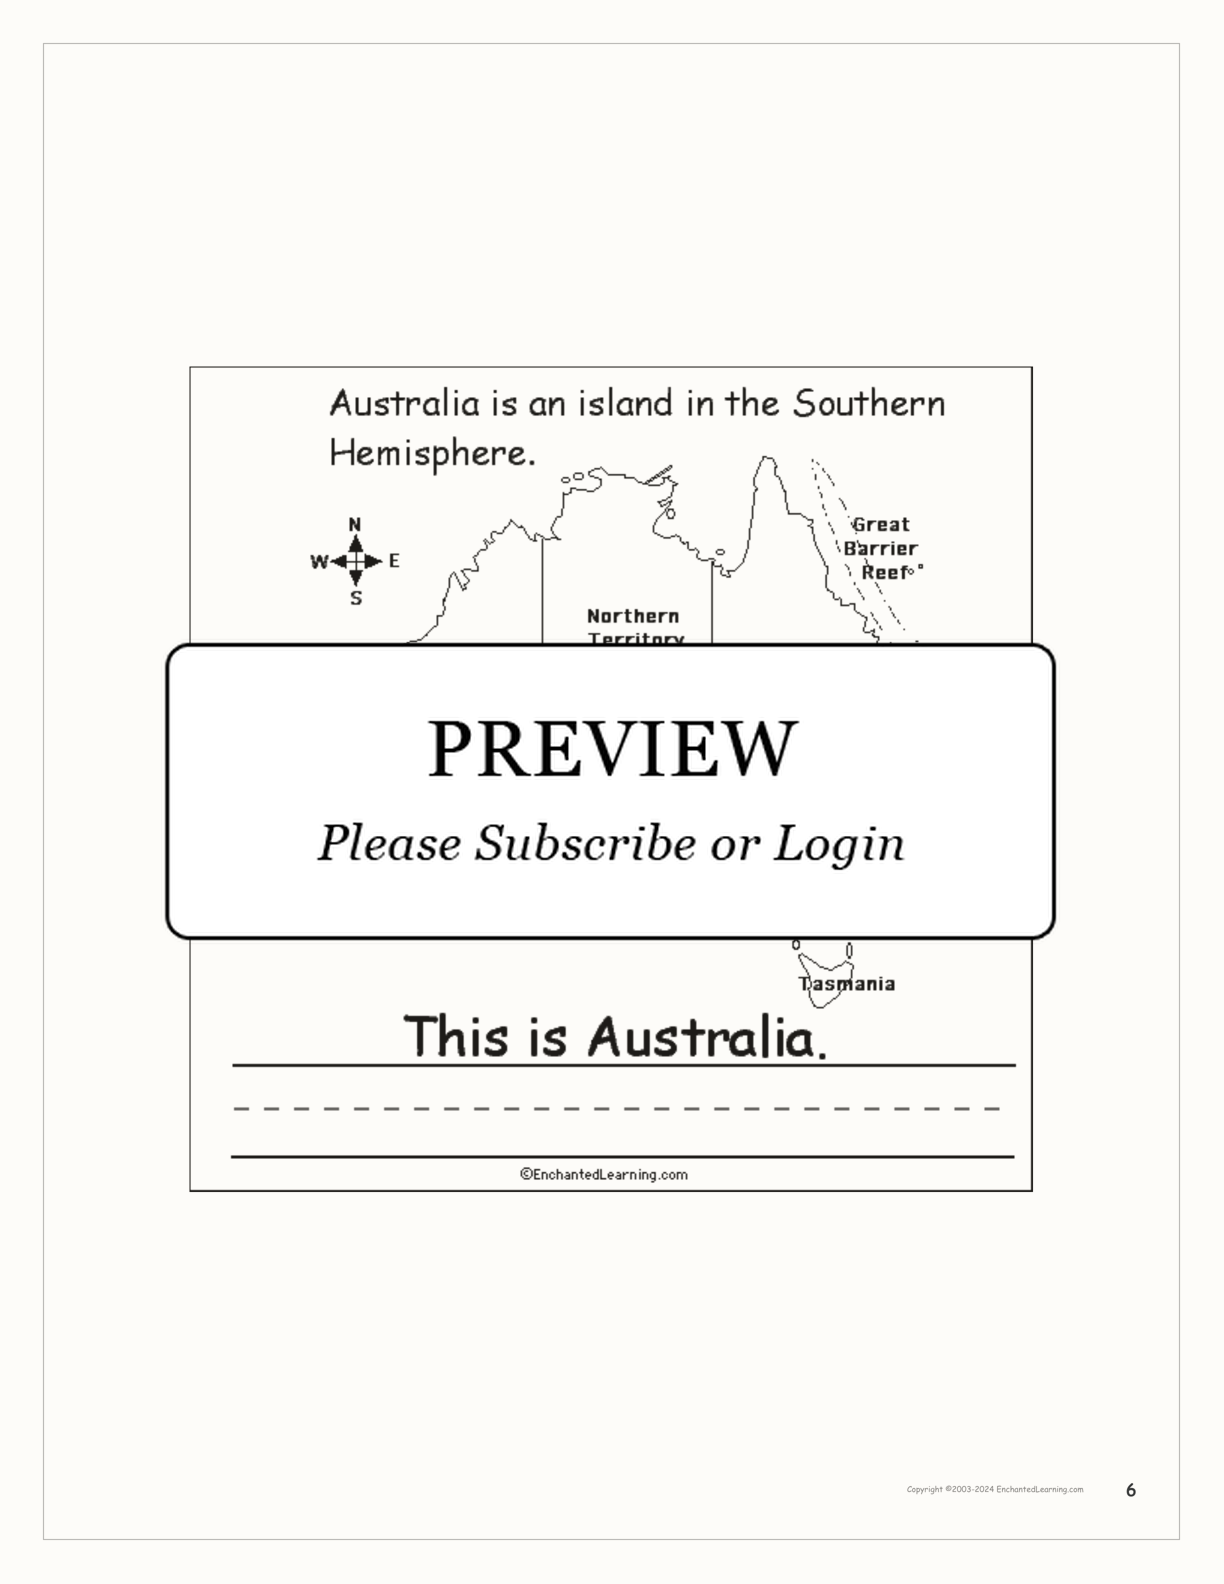 The Seven Continents Book interactive printout page 6